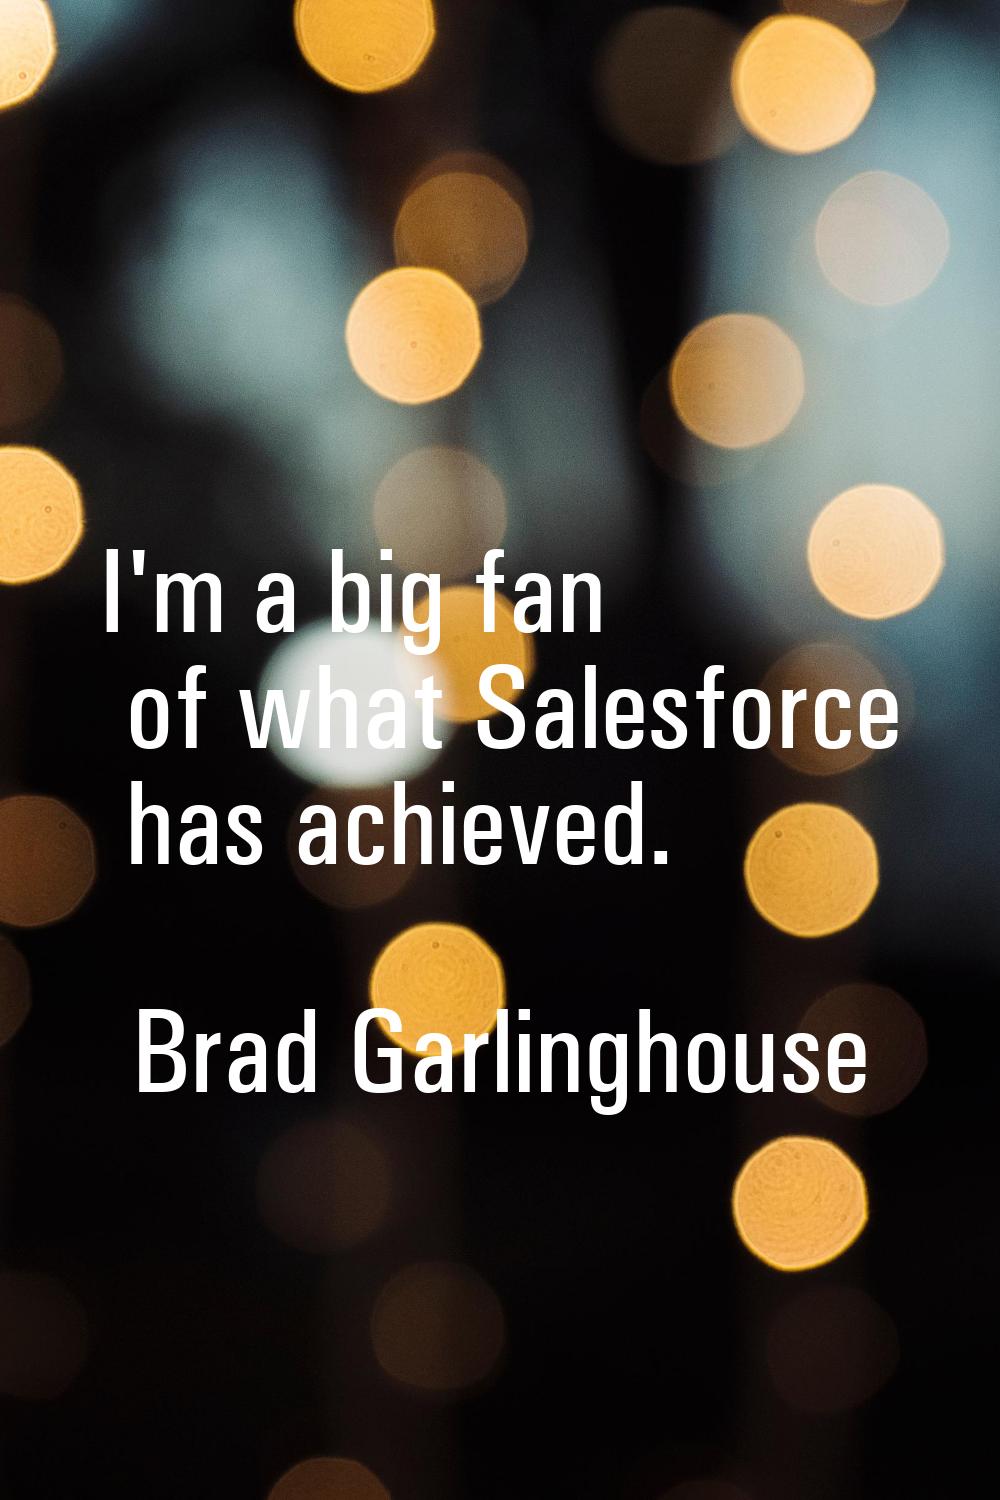 I'm a big fan of what Salesforce has achieved.